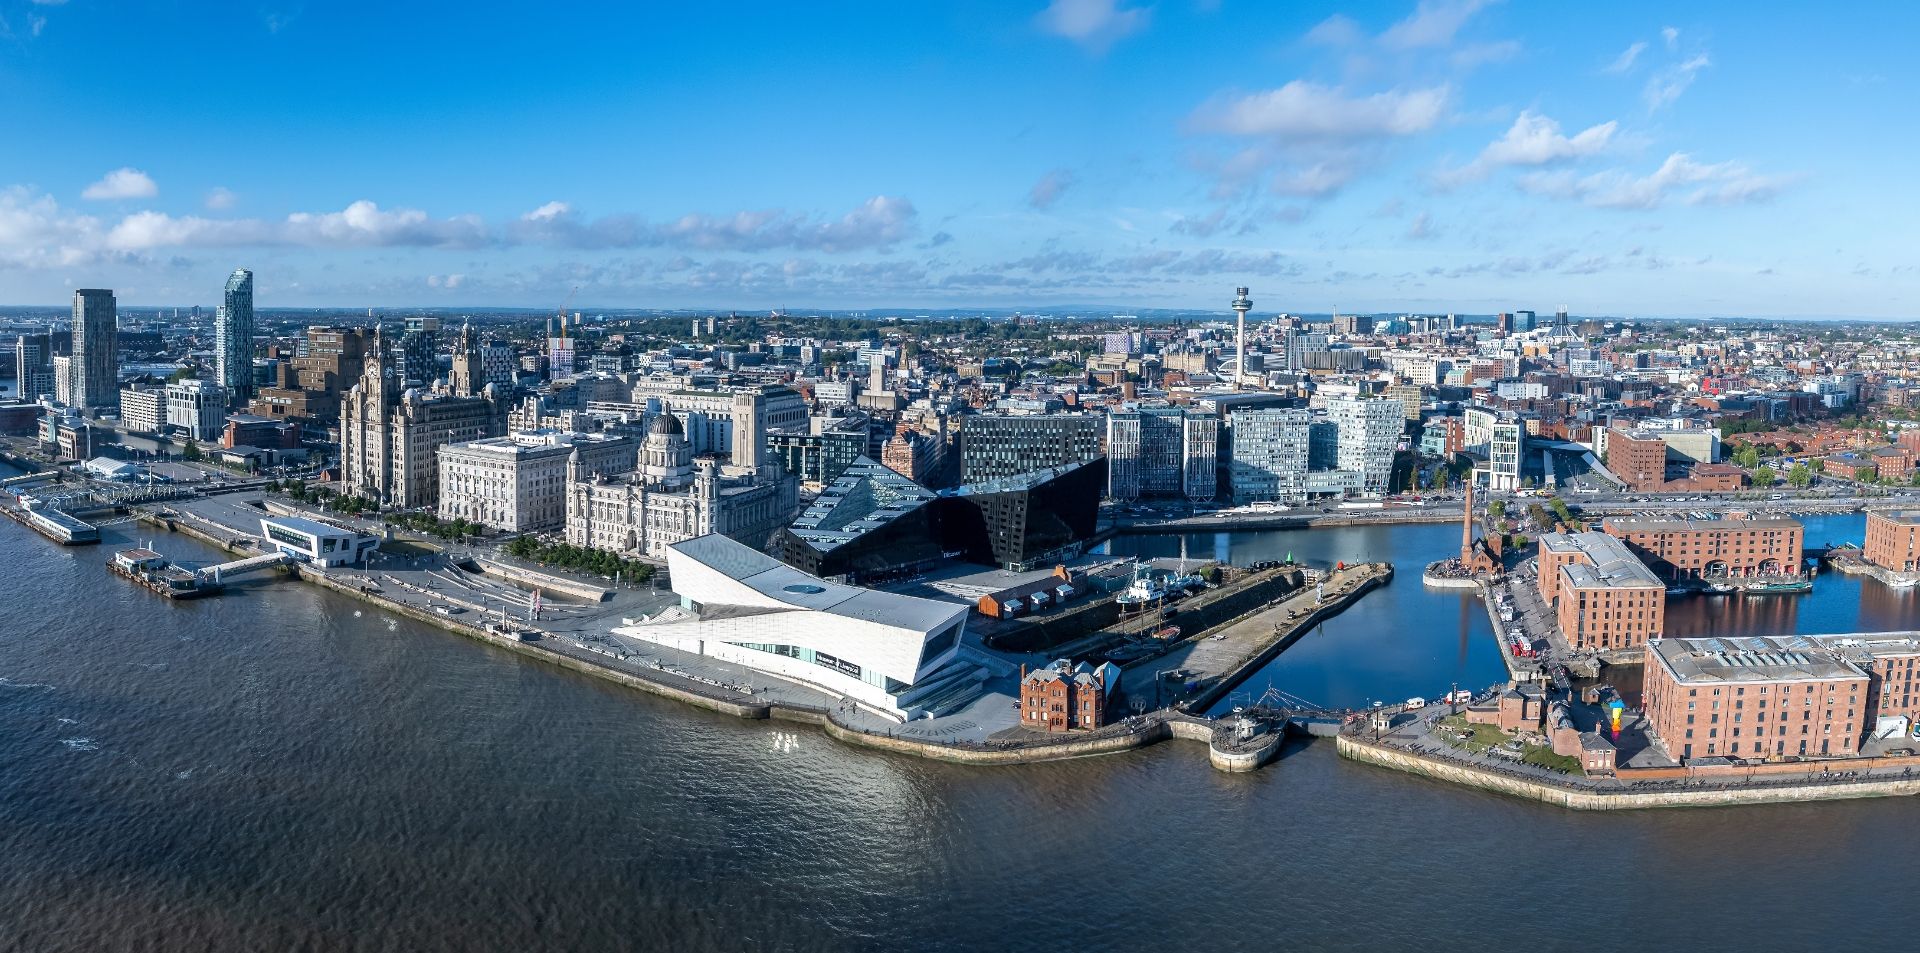 Aerial view of Liverpool city docks.